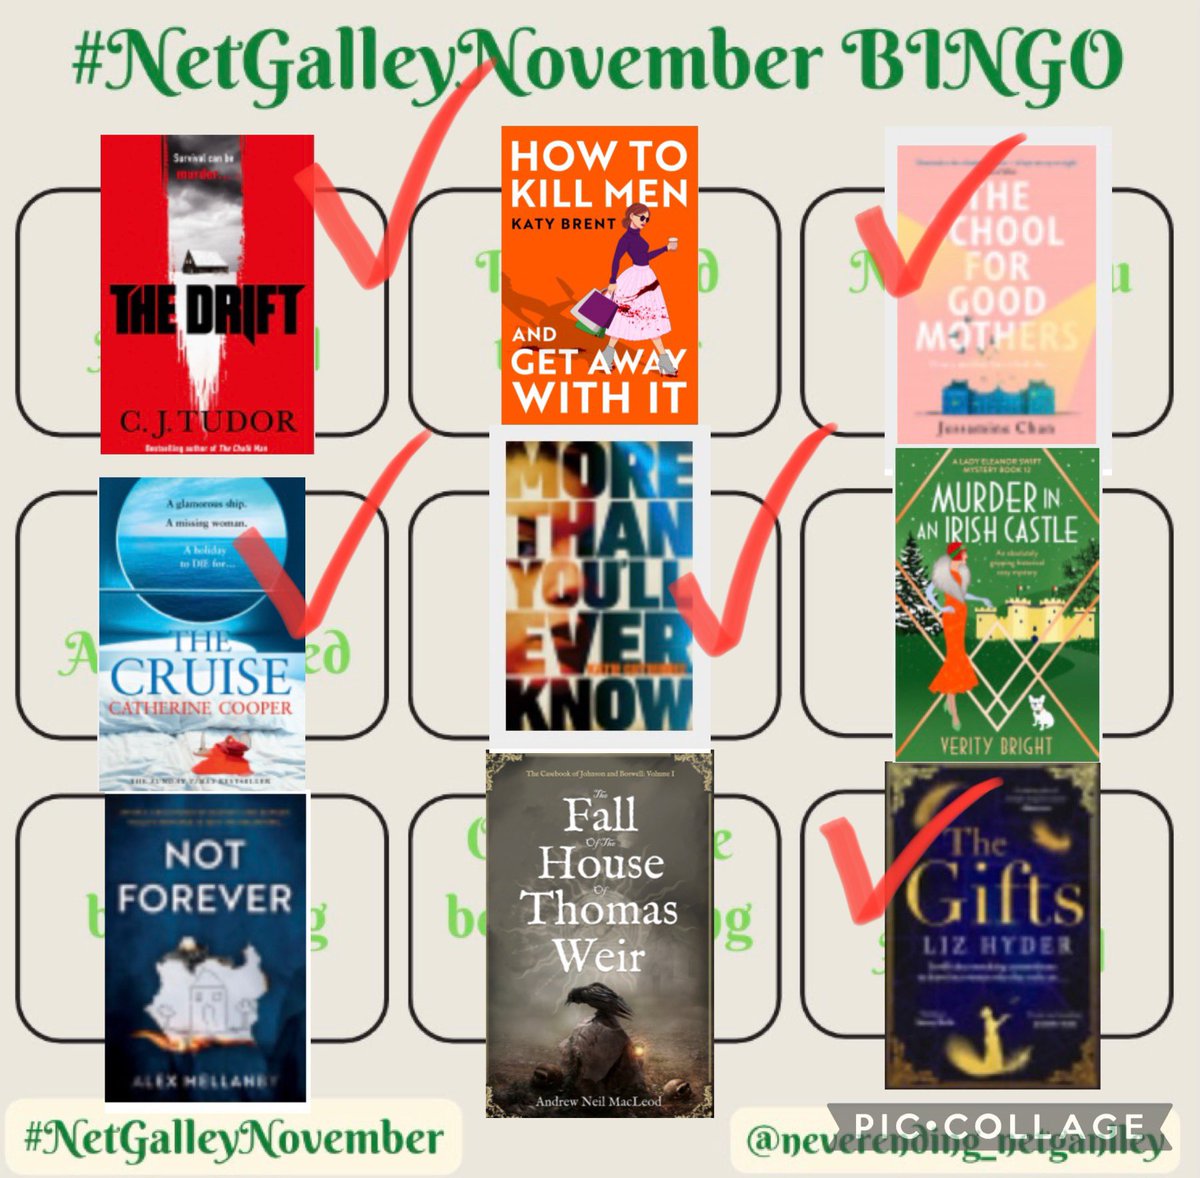 #NetGalleyNovember update: Book number 5 finished! #TheDrift by @cjtudor. 
Others completed include #TheCruise @catherinecooper 
#TheGifts @LondonBessie 
#TheSchoolForGoodMothers @jessaminechan 
#MoreThanYoullEverKnow 
(Mini reviews below) @NeverEndingNG